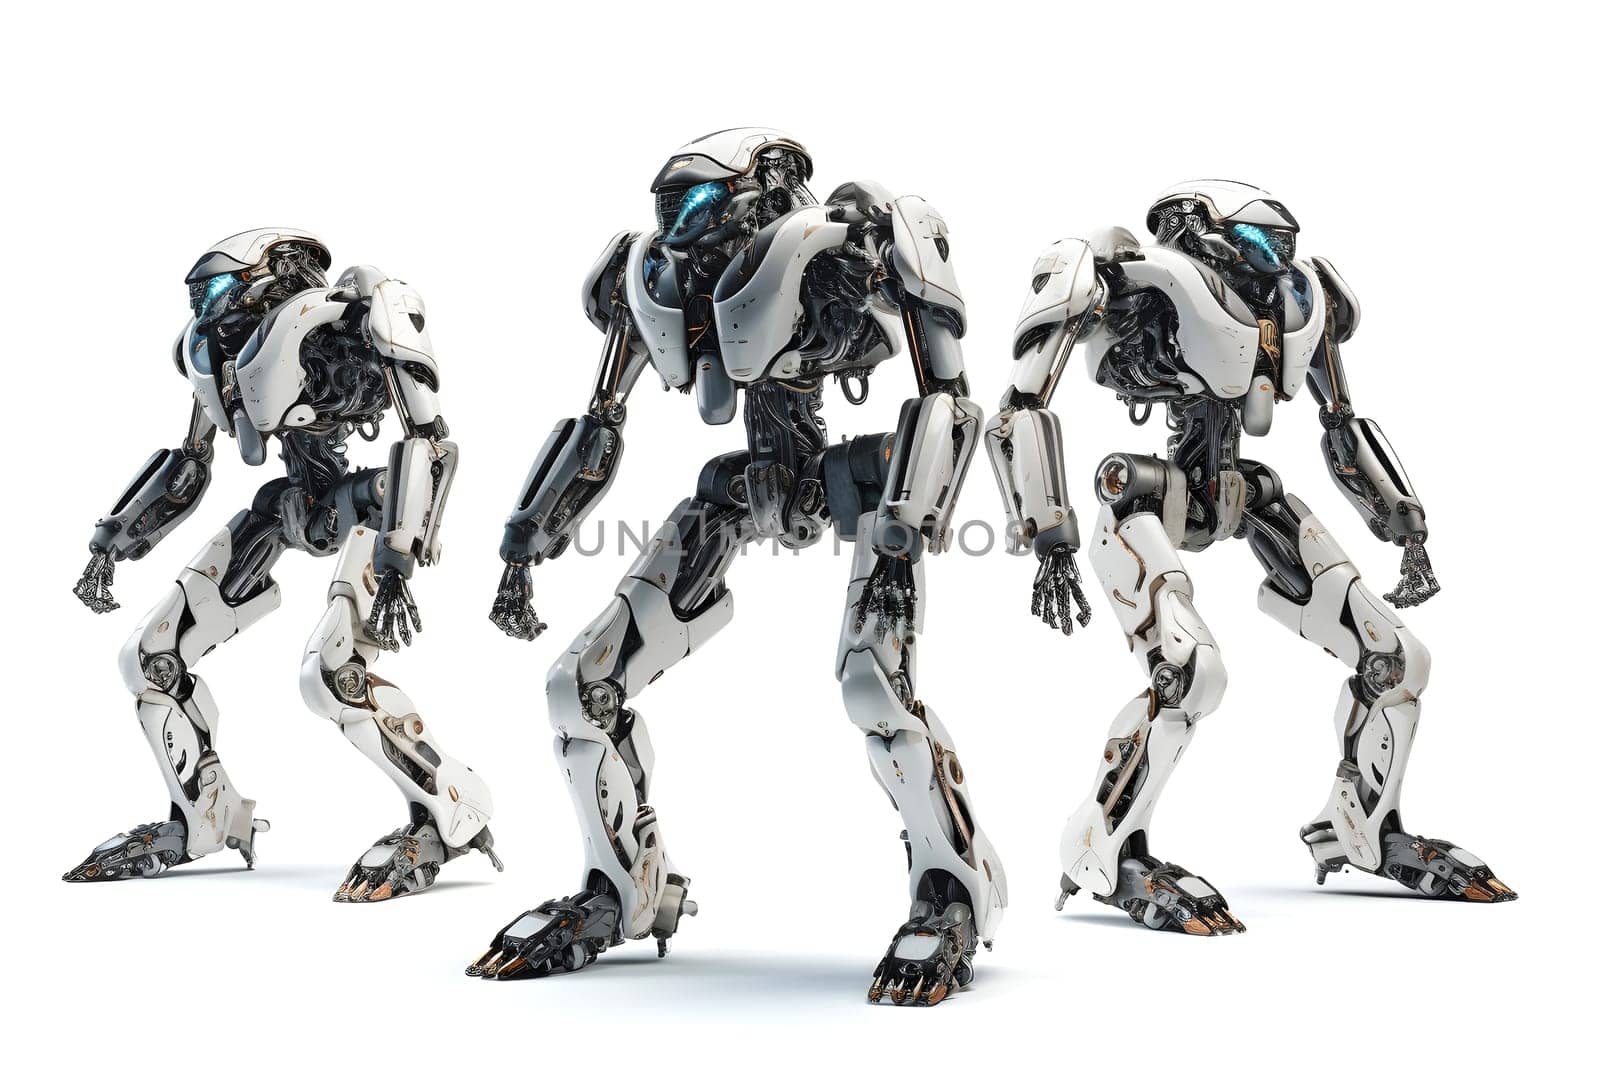 group of three futuristic high-tech humanoid anthropomorphic robots on white background, neural network generated image by z1b